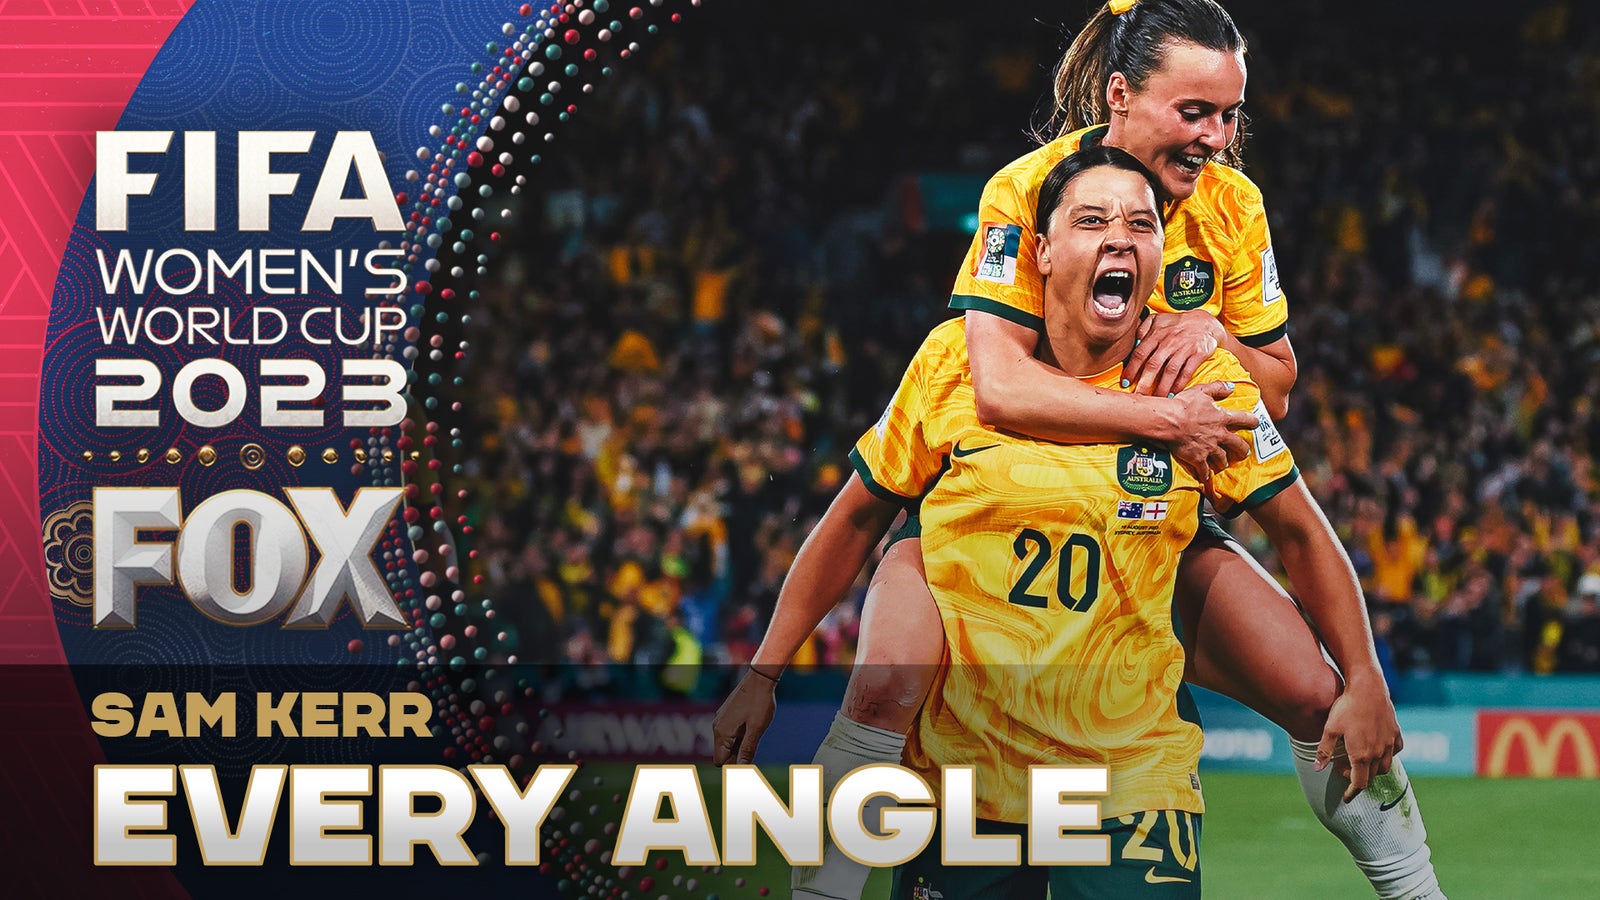 Sam Kerr's LEGENDARY strike vs. England in the World Cup semifinals | Every Angle